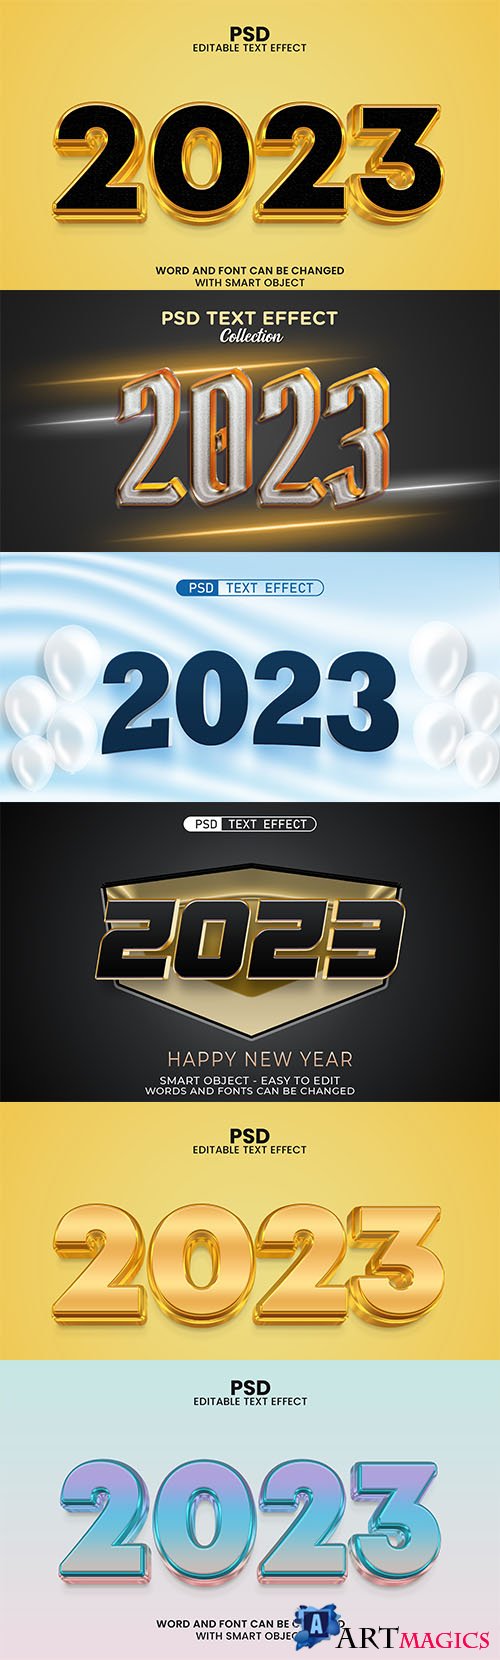 2023 new year golden 3d psd text effect with beautiful background